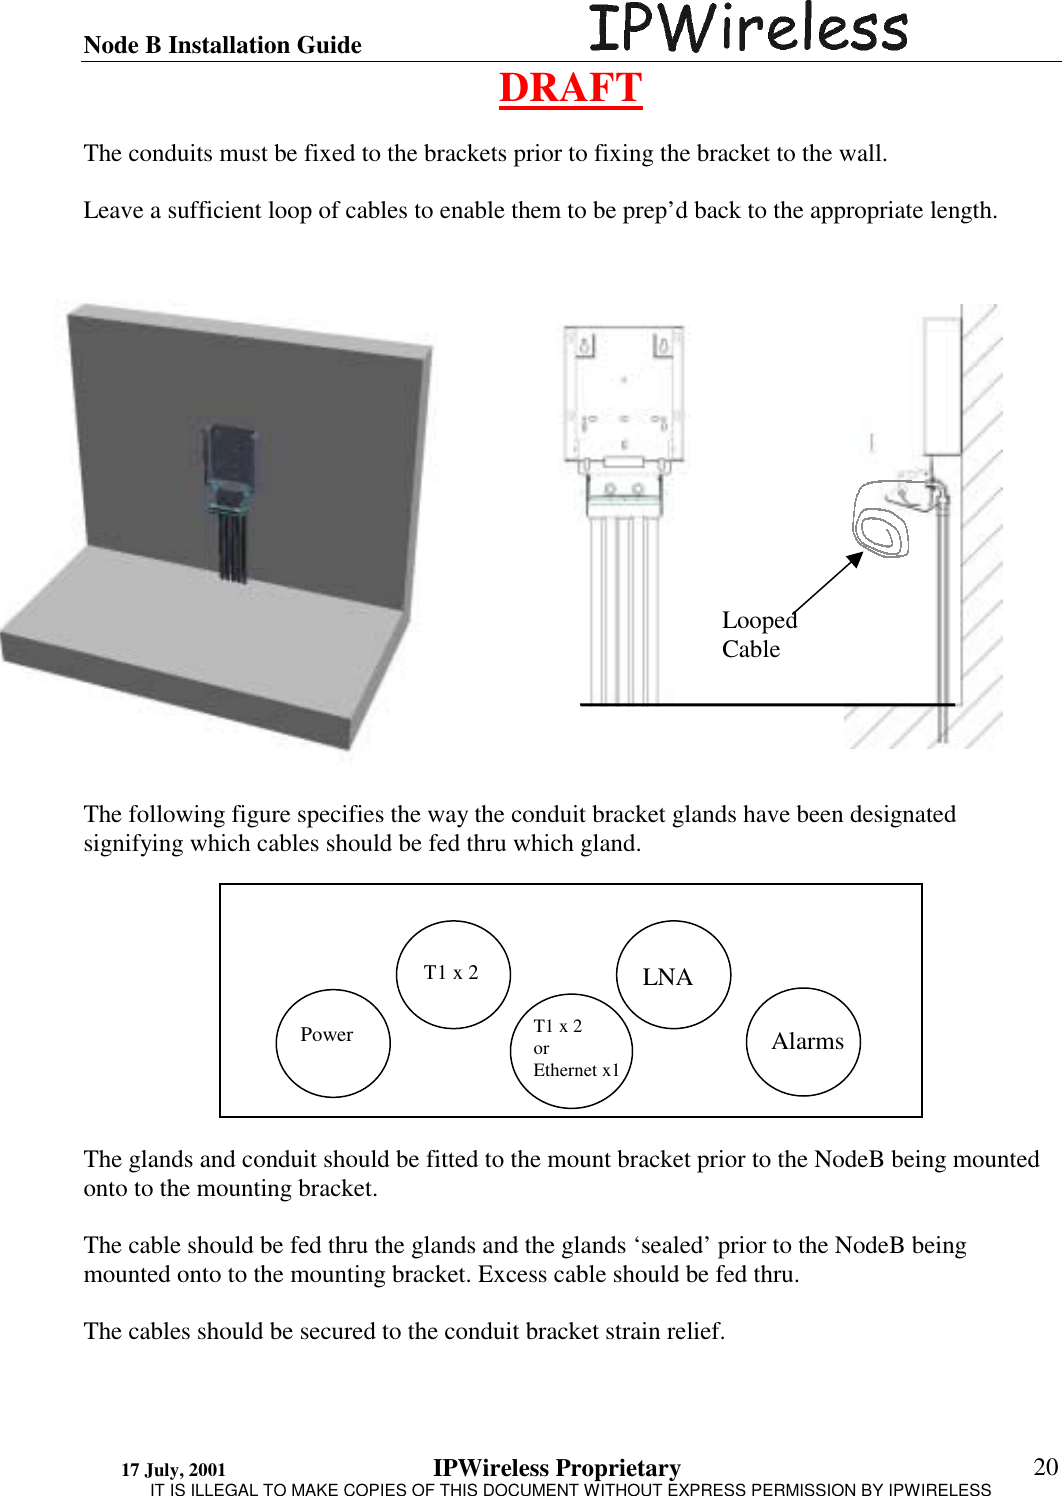 Node B Installation Guide                                      DRAFT 17 July, 2001                                 IPWireless Proprietary                                                  IT IS ILLEGAL TO MAKE COPIES OF THIS DOCUMENT WITHOUT EXPRESS PERMISSION BY IPWIRELESS  20  The conduits must be fixed to the brackets prior to fixing the bracket to the wall.  Leave a sufficient loop of cables to enable them to be prep’d back to the appropriate length.                     The following figure specifies the way the conduit bracket glands have been designated signifying which cables should be fed thru which gland.           The glands and conduit should be fitted to the mount bracket prior to the NodeB being mounted onto to the mounting bracket.  The cable should be fed thru the glands and the glands ‘sealed’ prior to the NodeB being mounted onto to the mounting bracket. Excess cable should be fed thru.  The cables should be secured to the conduit bracket strain relief.  Looped Cable Power T1 x 2 T1 x 2 or Ethernet x1 LNA Alarms 